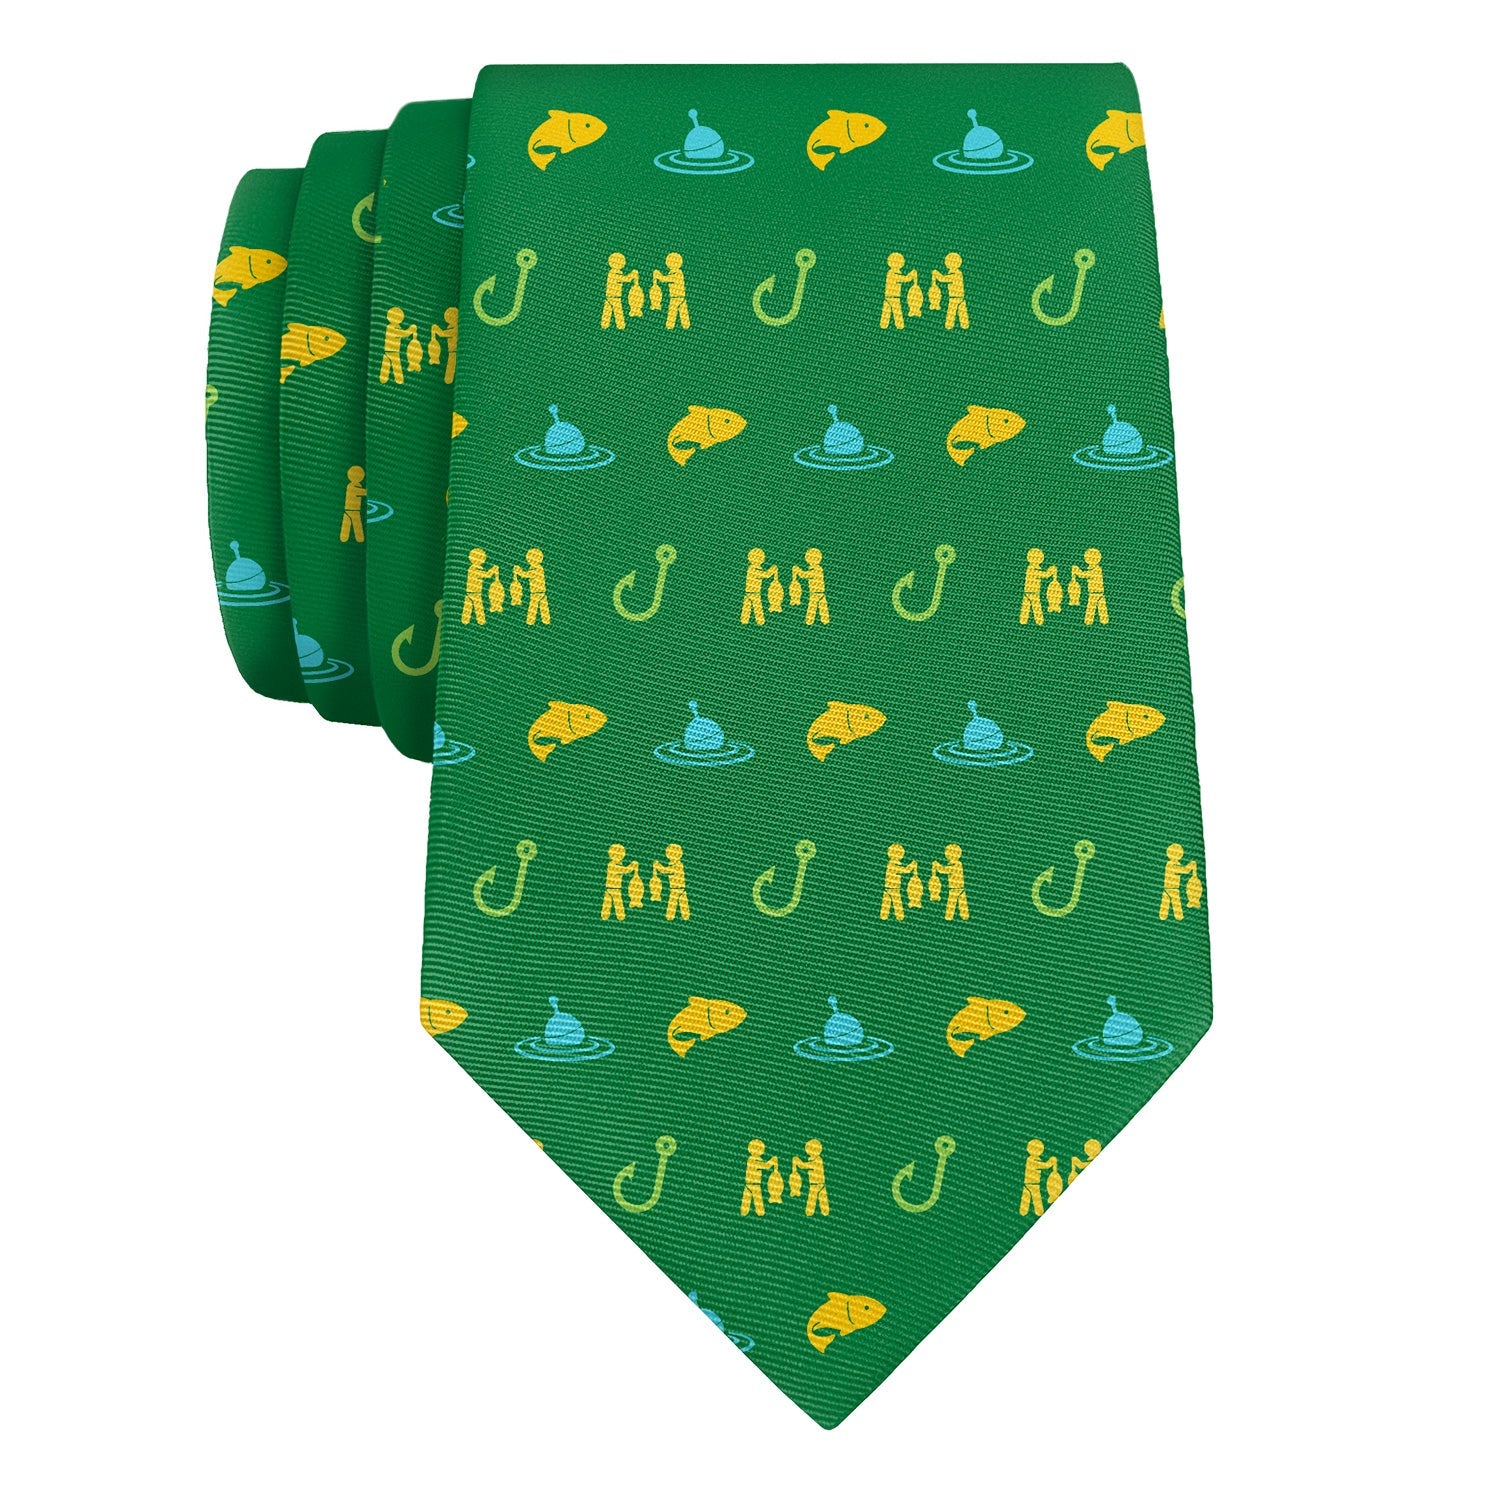 Fishing With Friends Necktie - Knotty 2.75" -  - Knotty Tie Co.